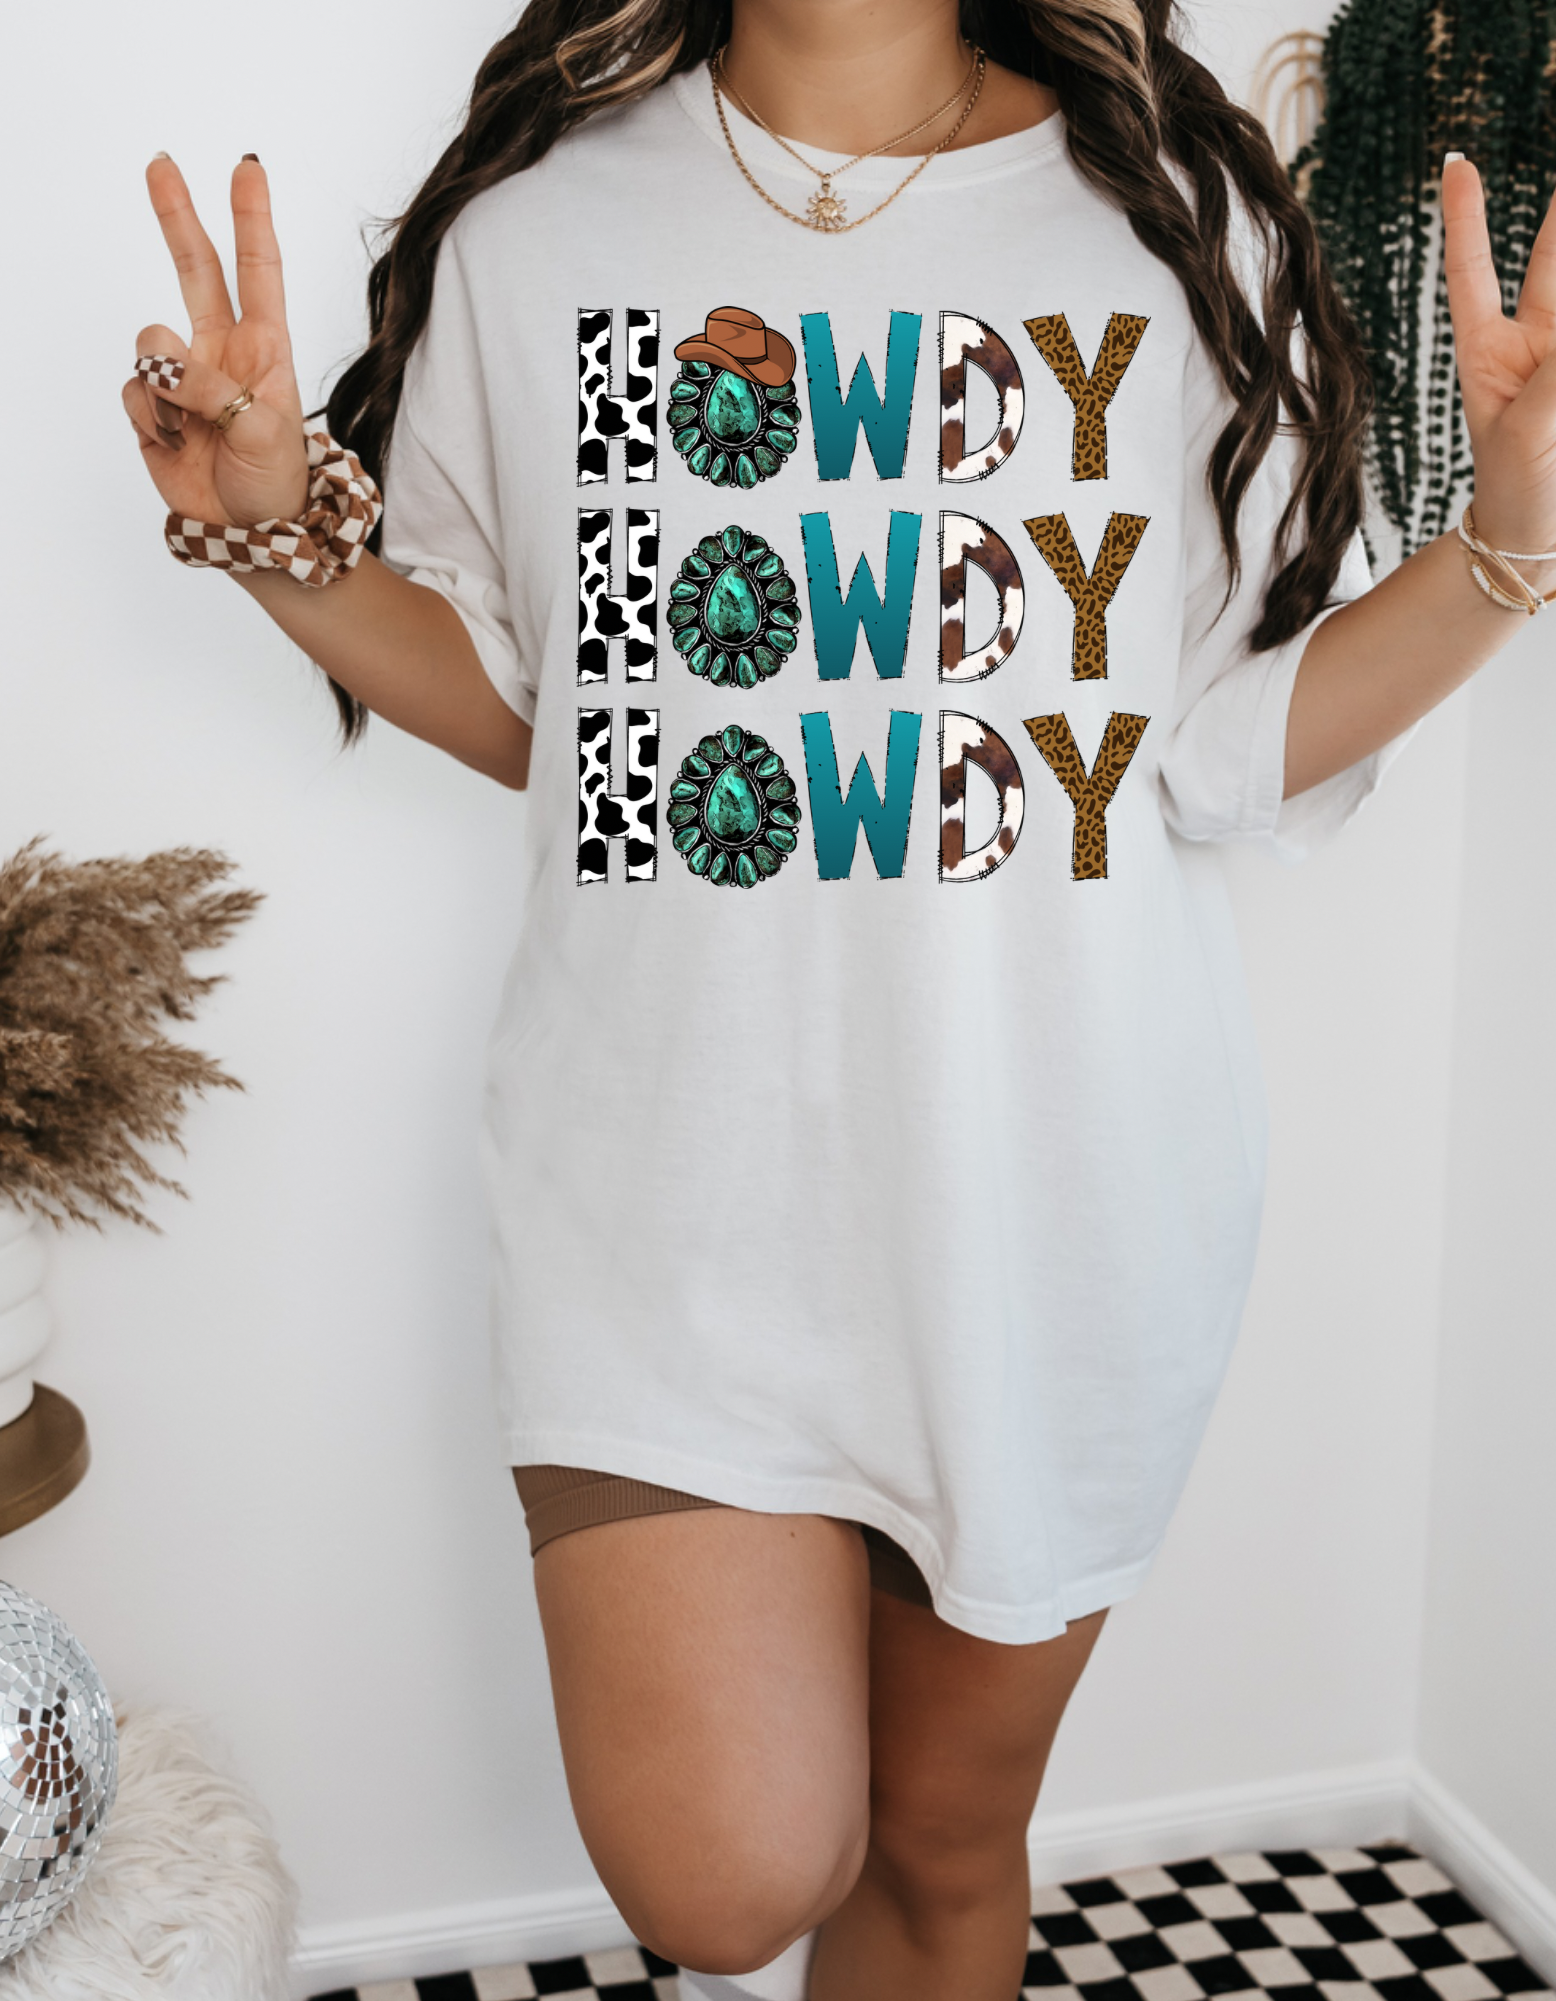 Western Prints Howdy Graphic T-Shirt